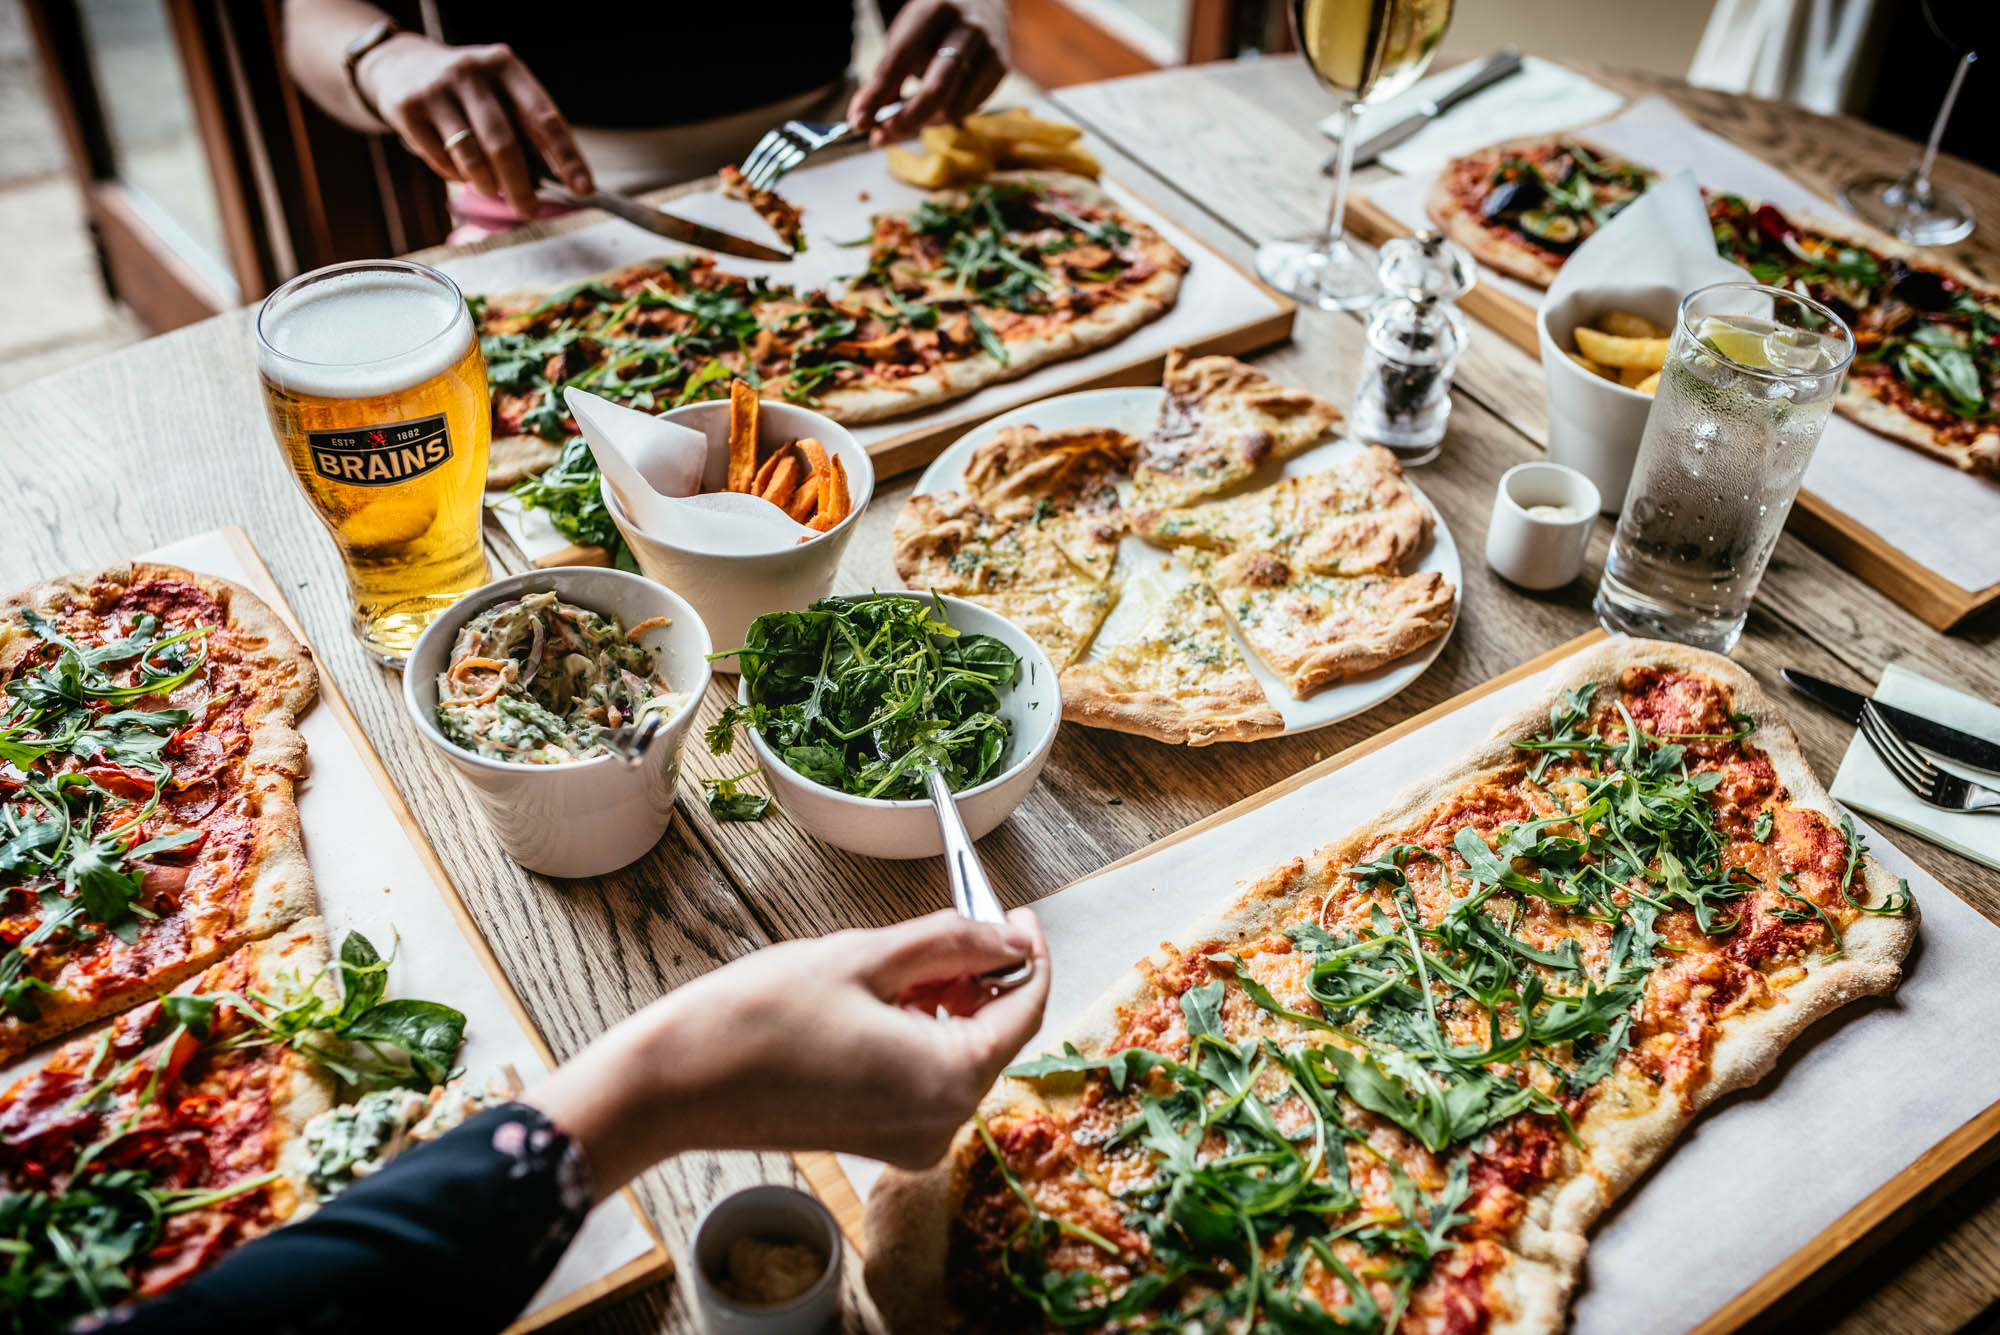 A photo of a table of food in a pub with four people sharing pizza, coleslaw, garlic bread and with drinks of beer, wine and sparkling water